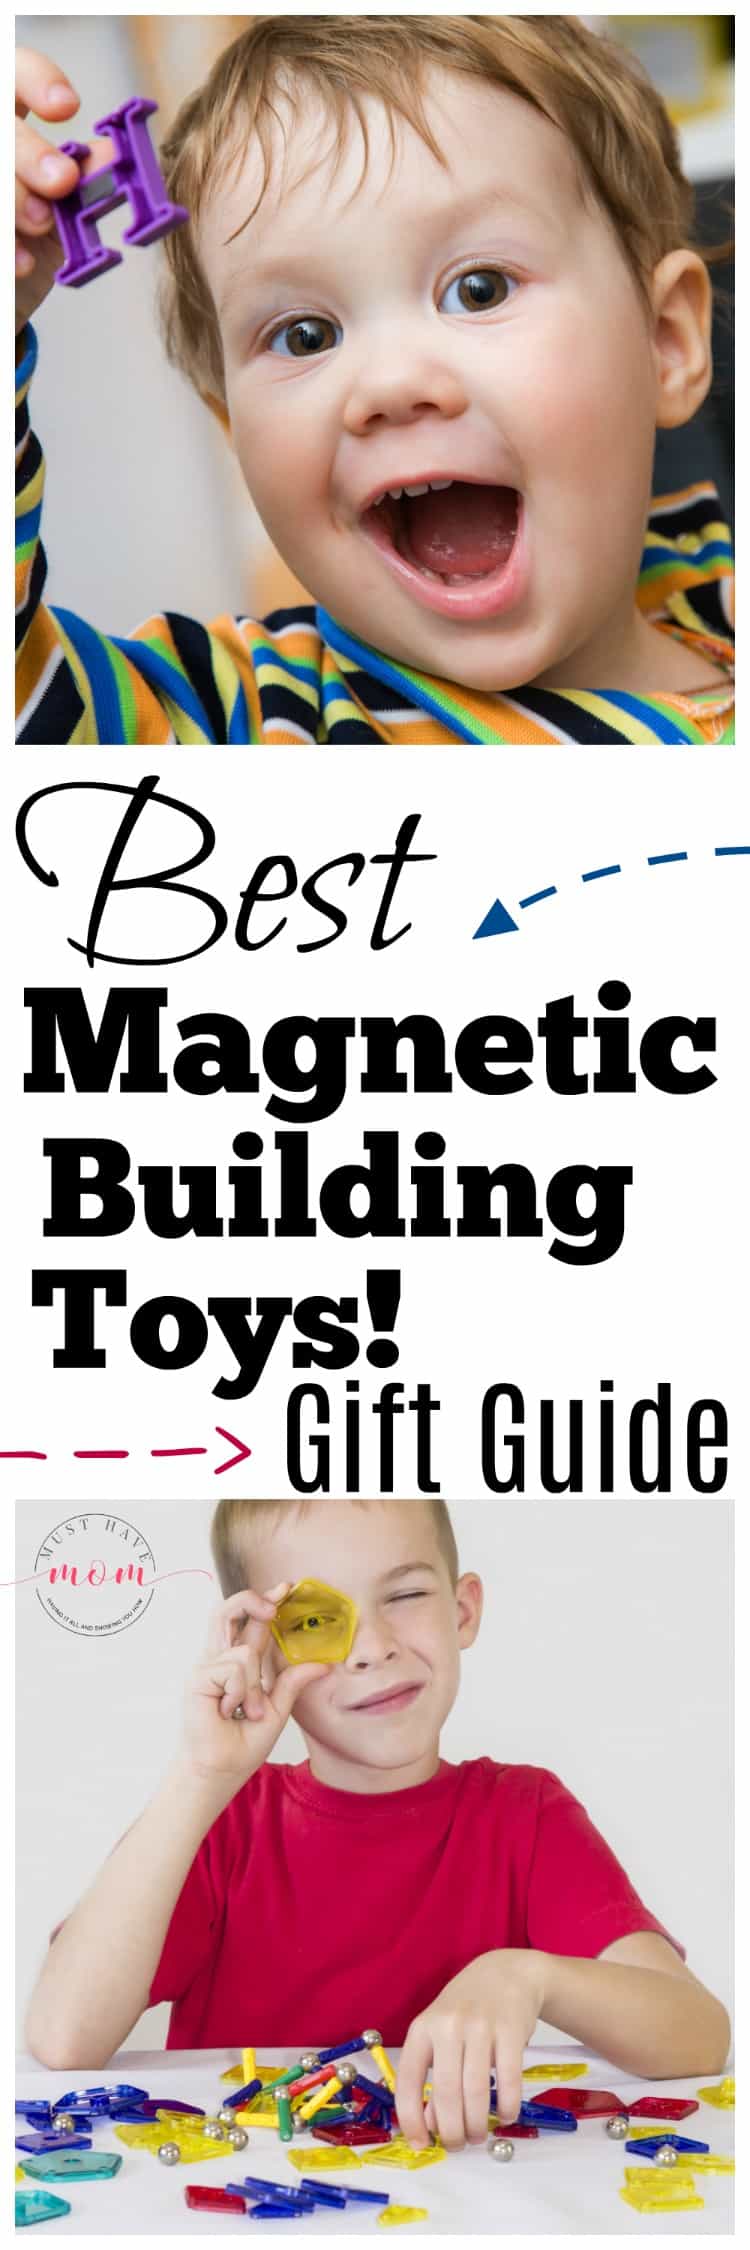 Best magnetic building toys for kids gift guide! Great magnets toy ideas for educational toys.